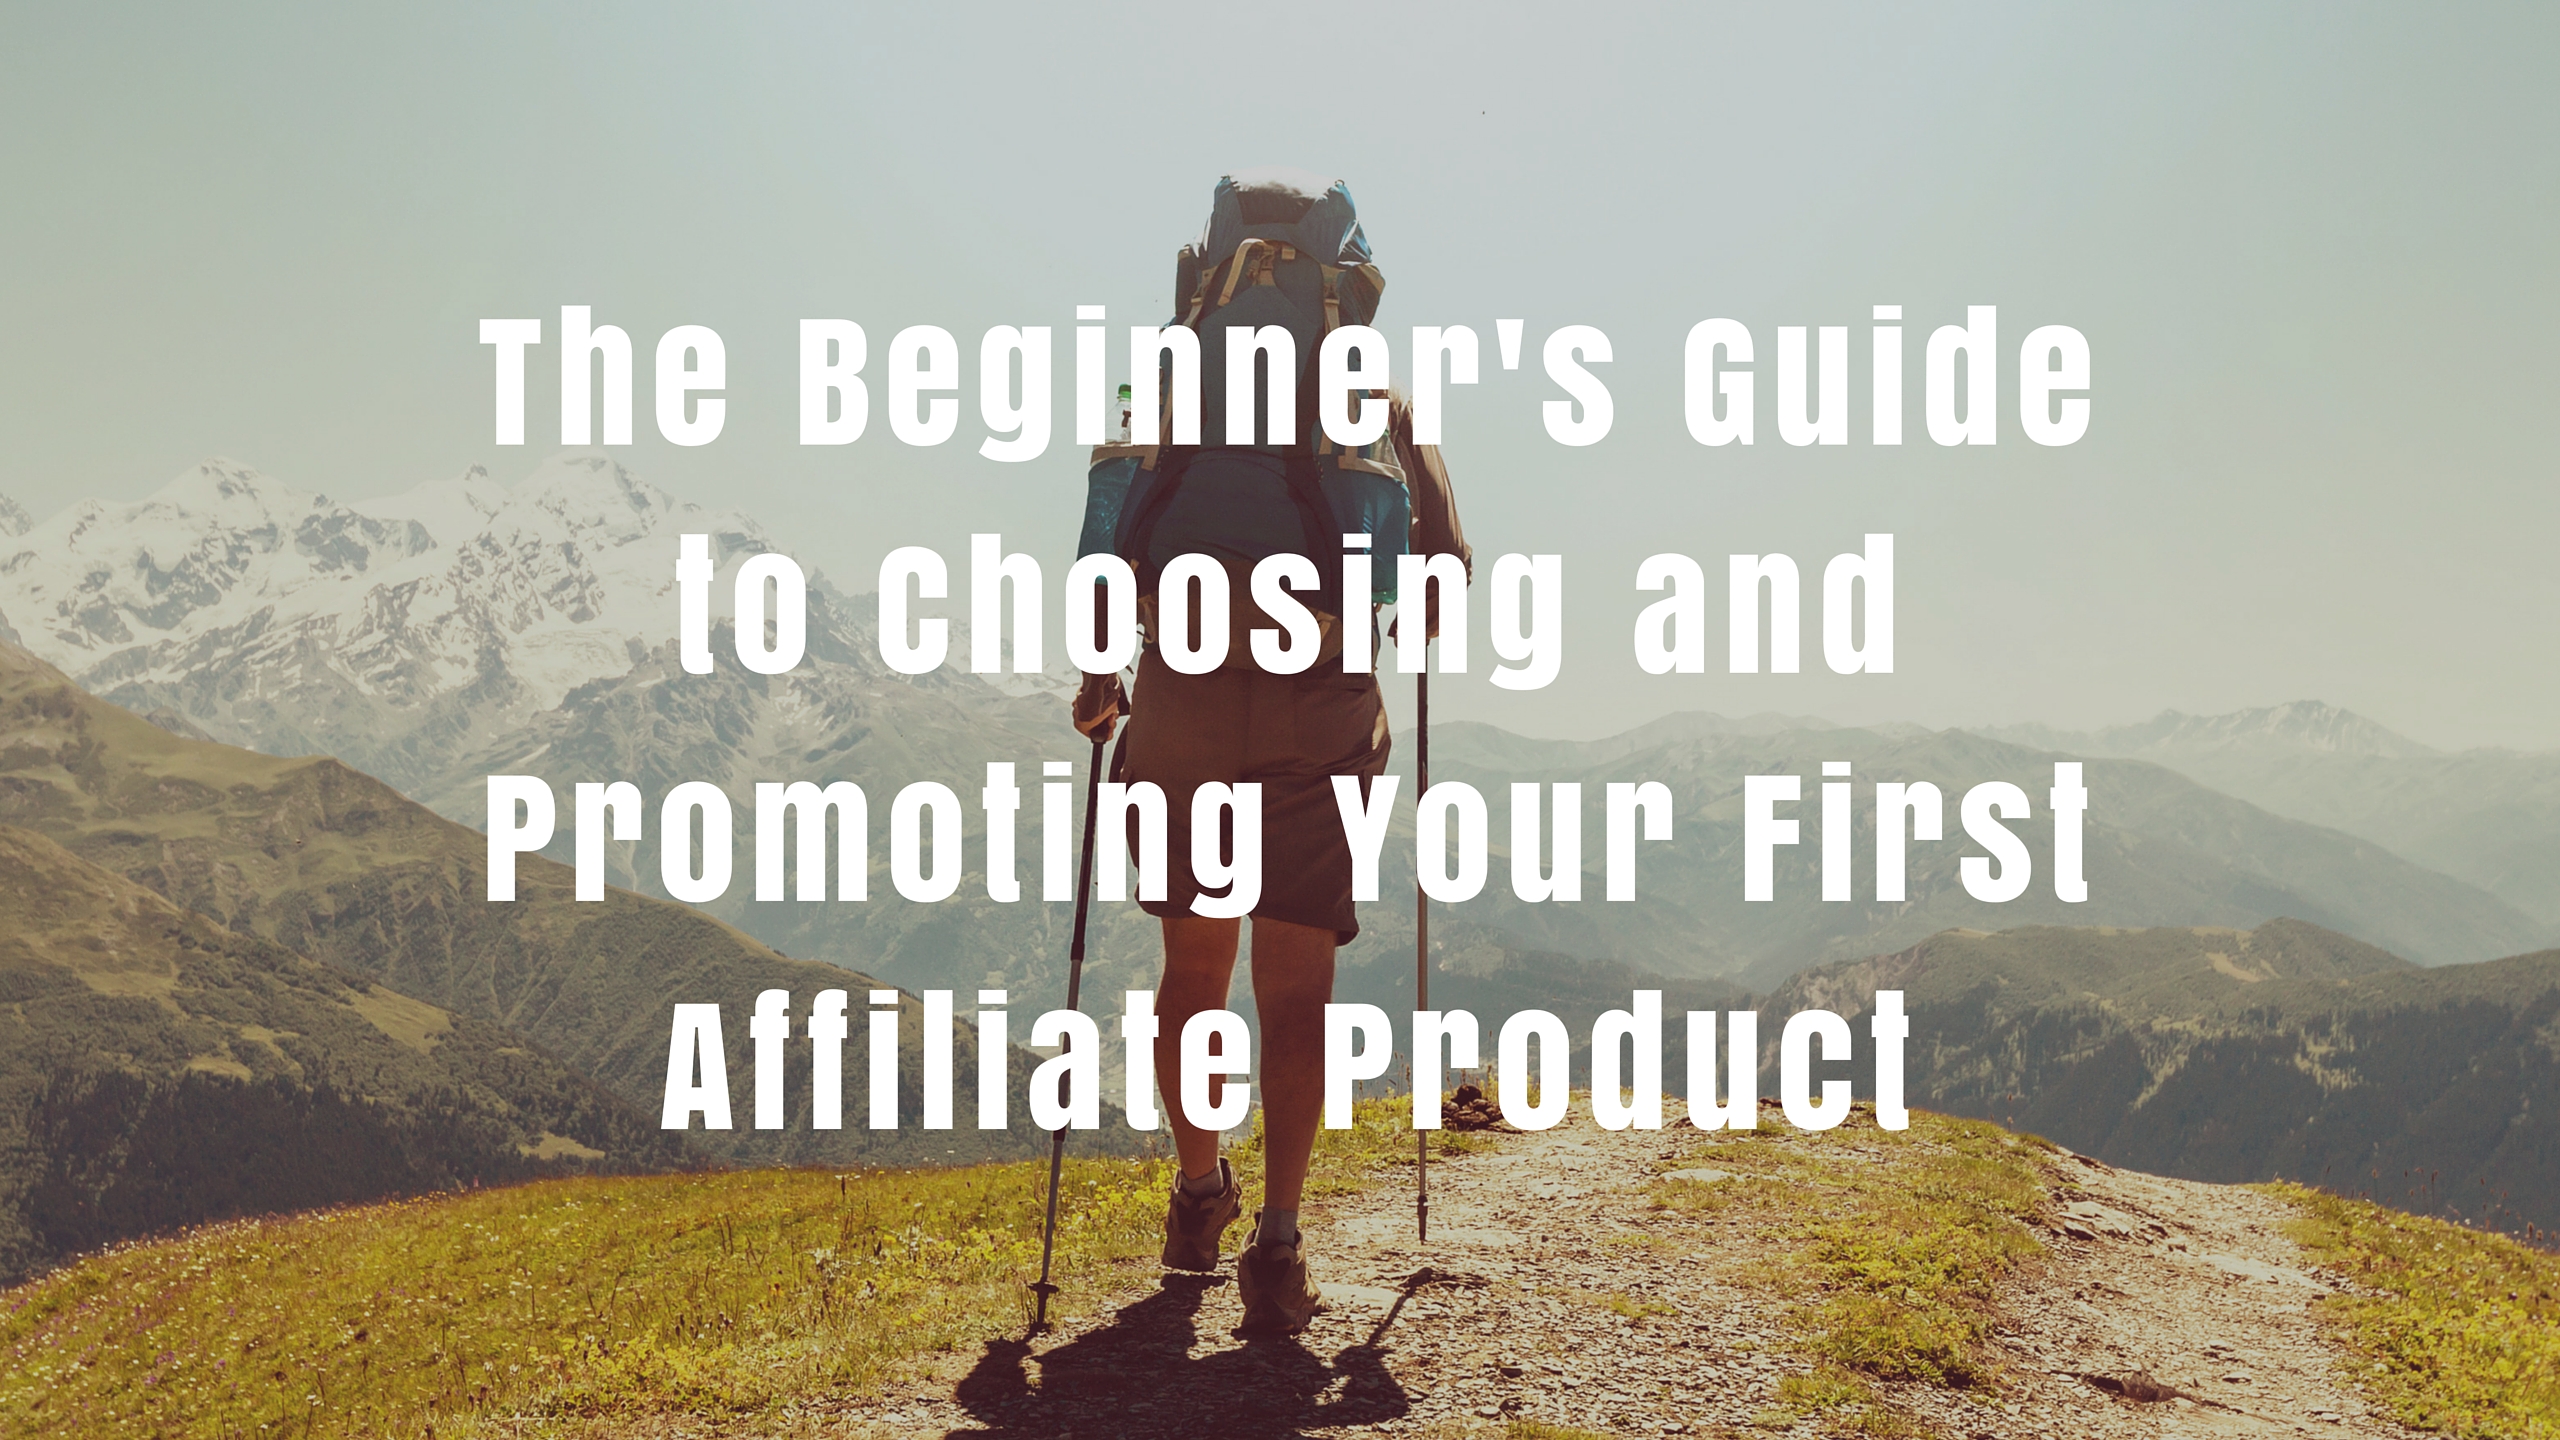 The Beginner's Guide To Choosing & Promoting Your First Affiliate Product